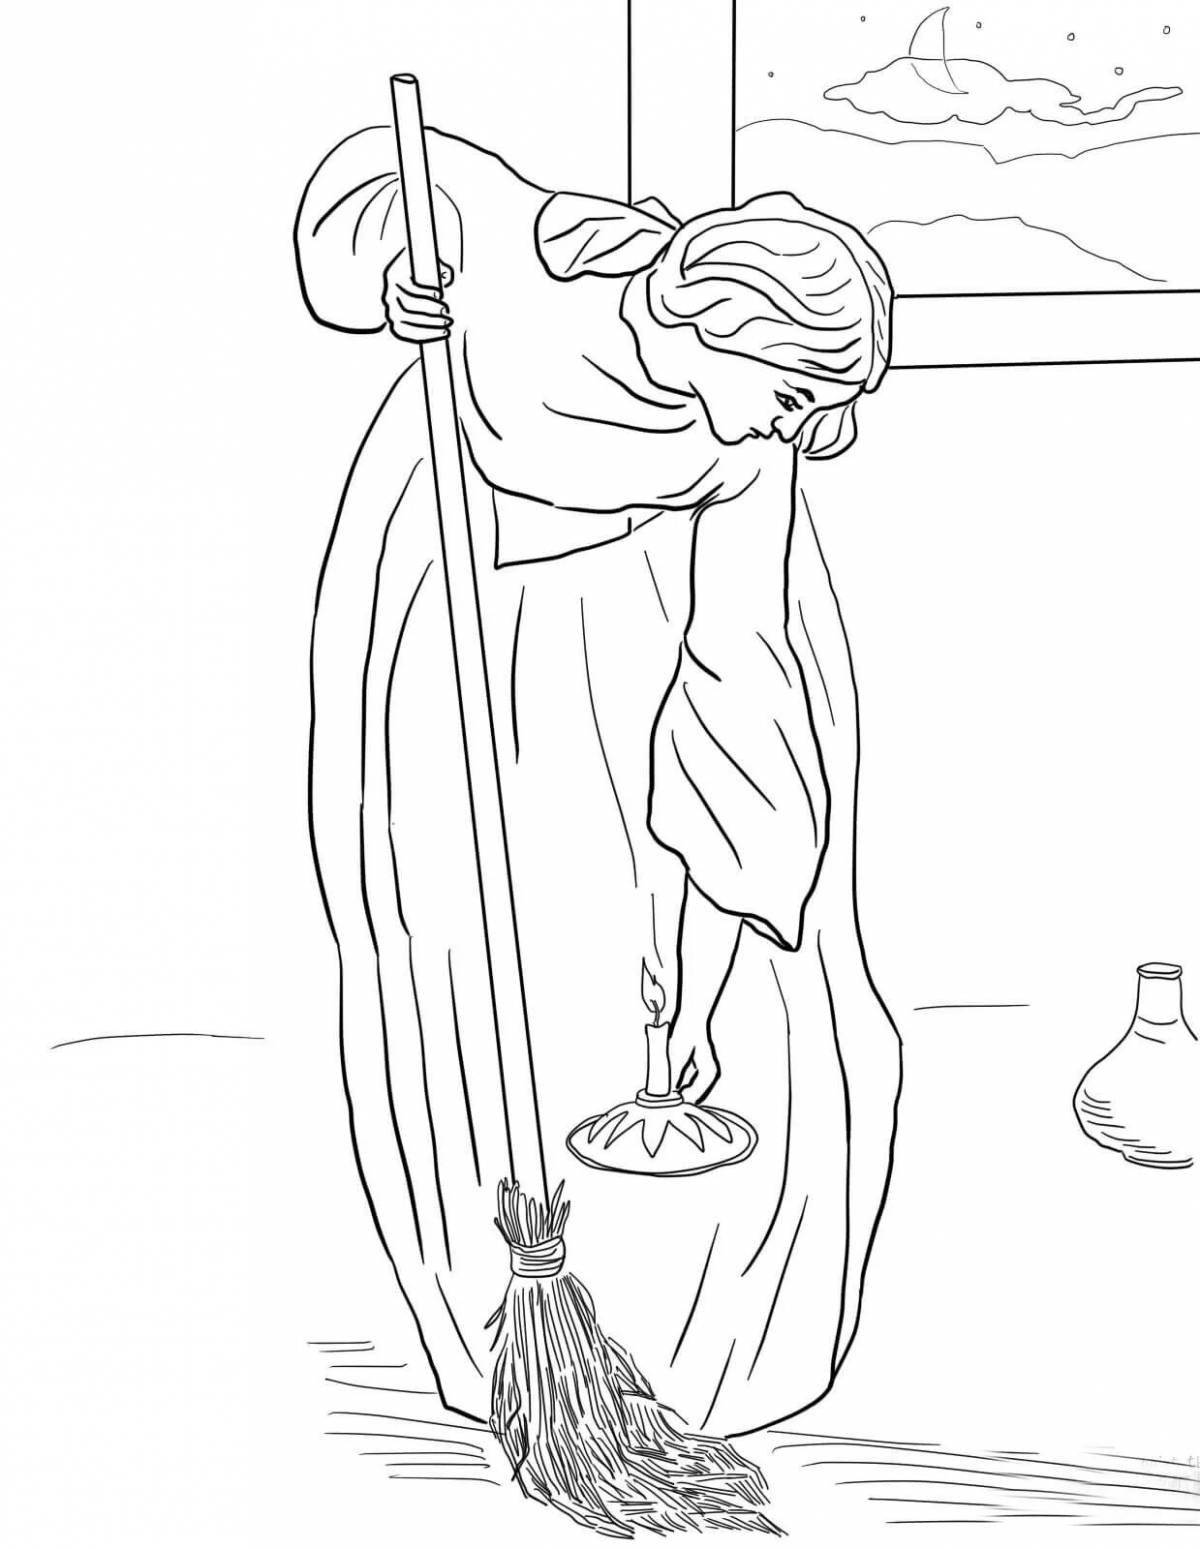 Coloring page delightful week of the prodigal son